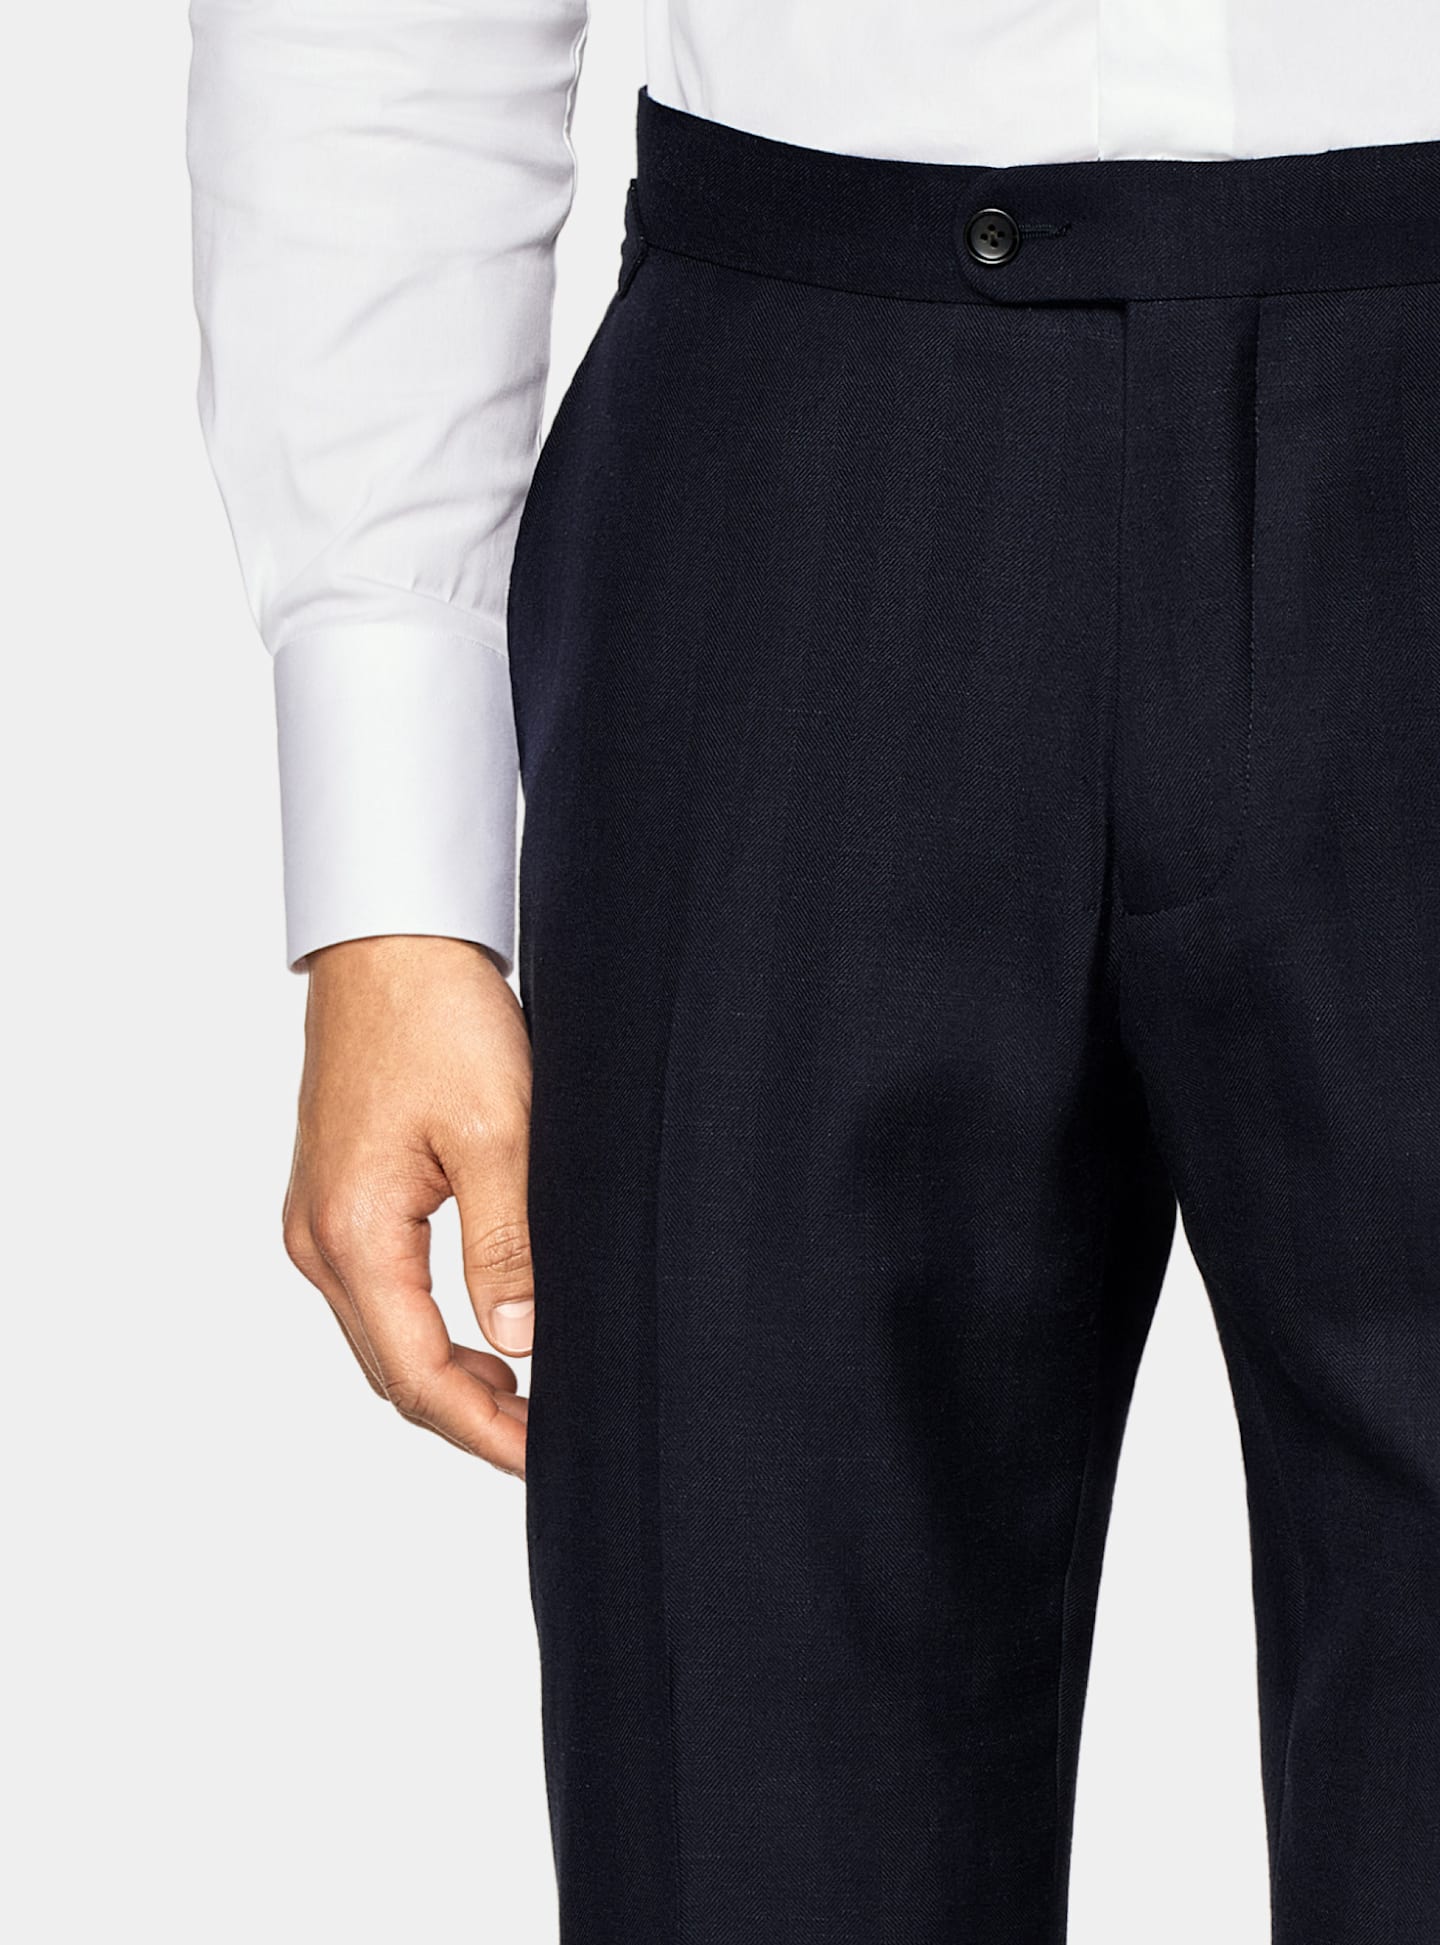 A zoomed in photo featuring kissing buttons on a navy formal suit.